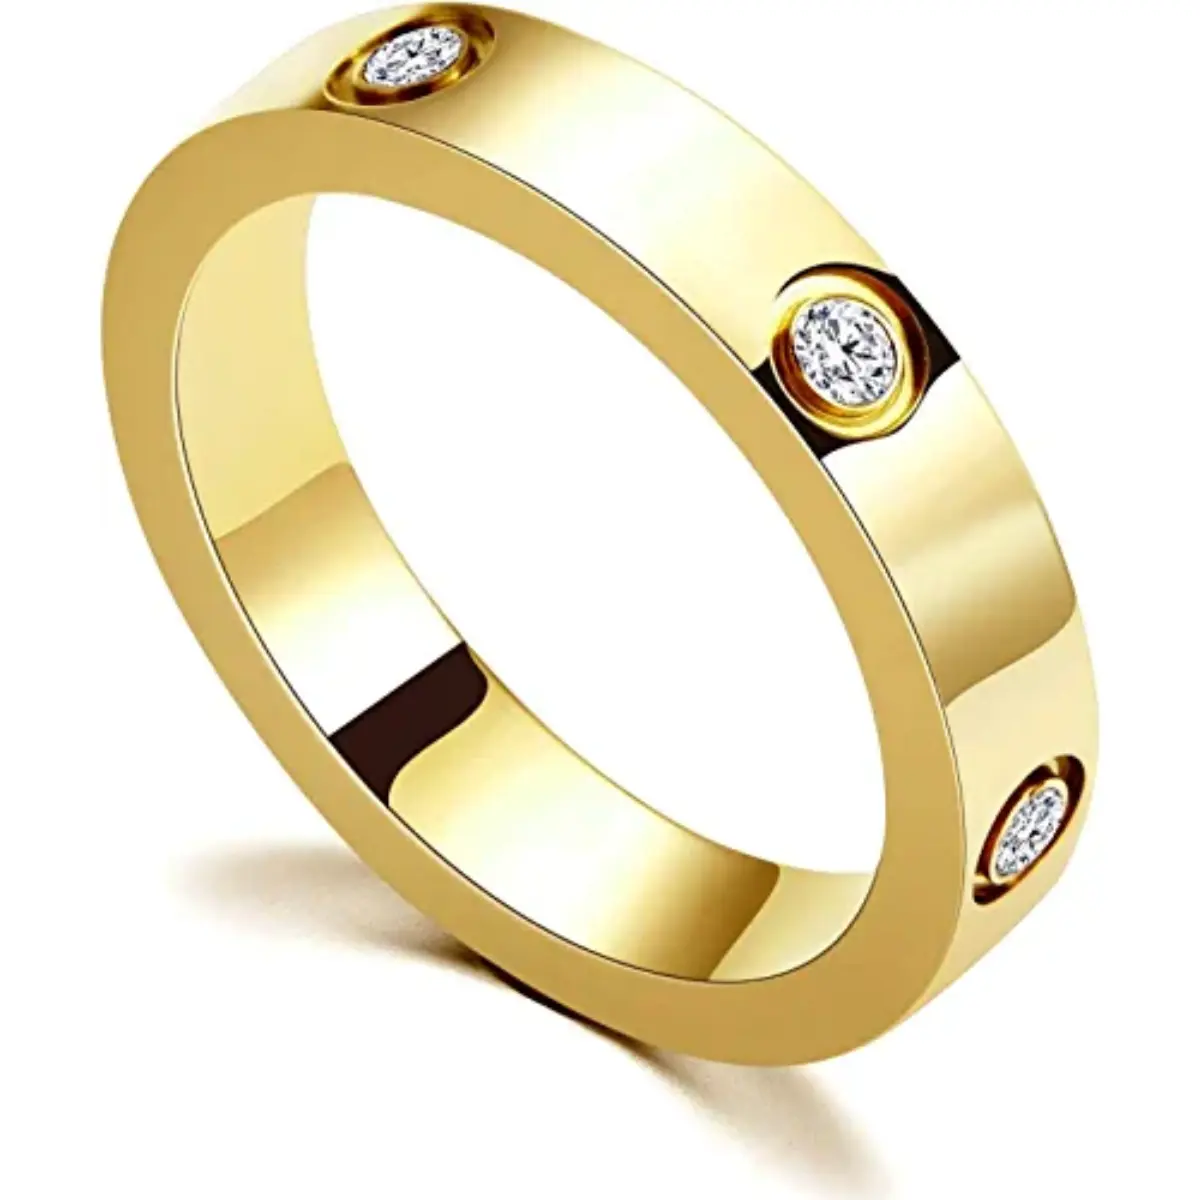 Cartier love ring dupe amazon